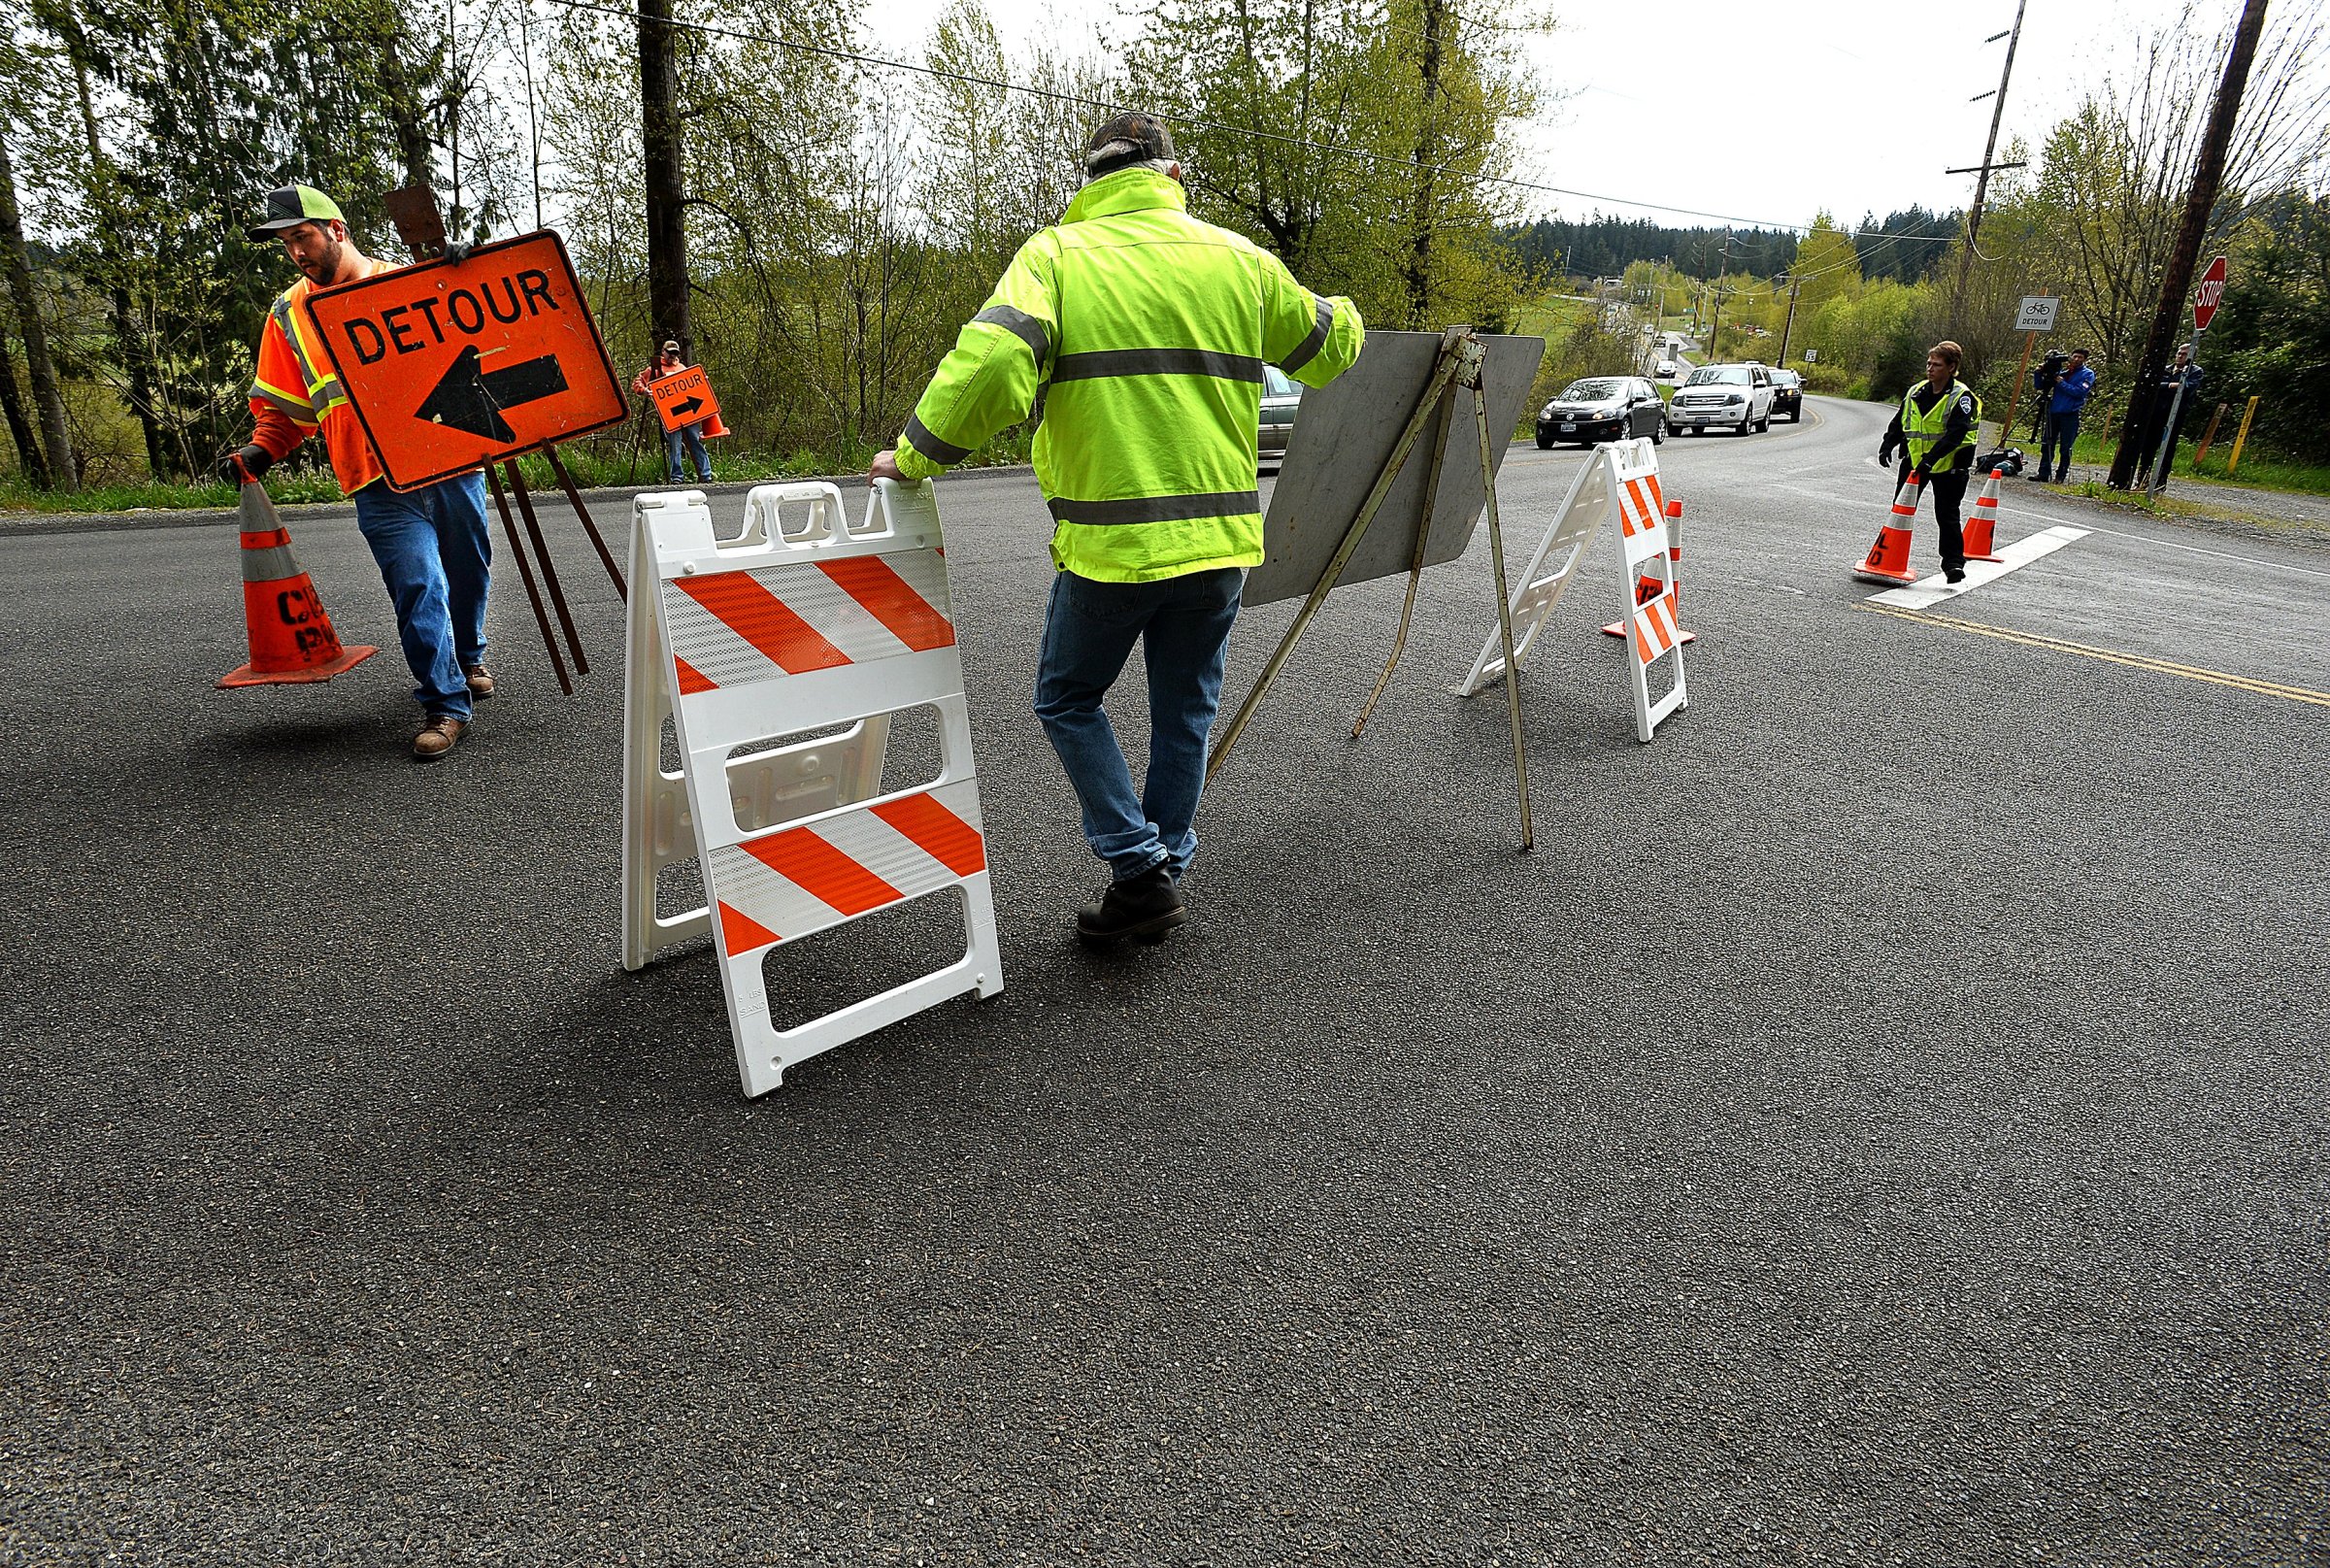 Workers with the Bonney Lake Public Works Department set up signs on April 13, 2015 in Bonney Lake, Wash.